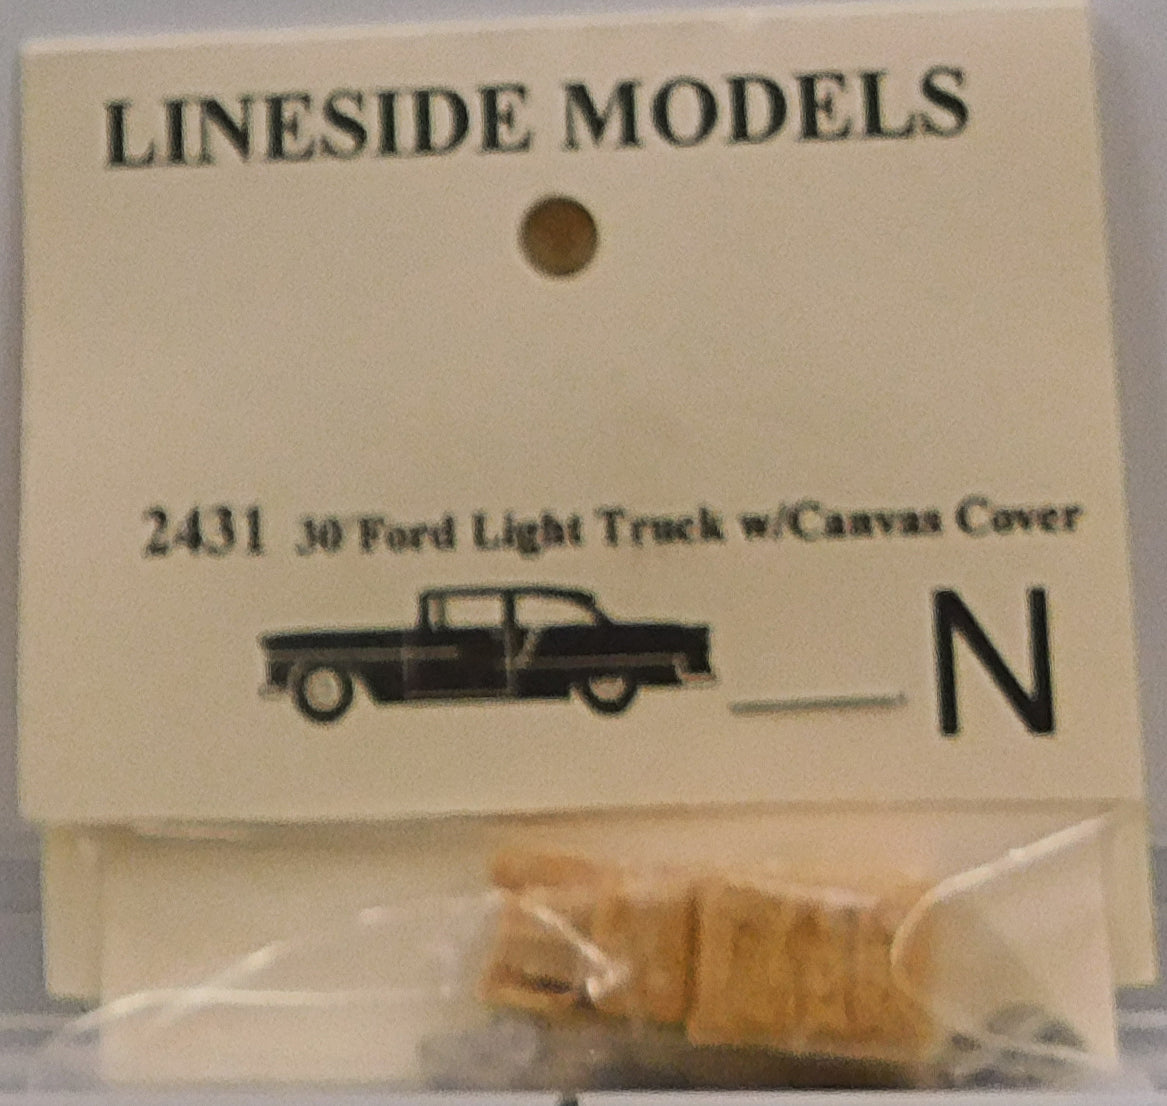 Lineside Models 2431 N 30 Ford Light Truck w/ Canvas Cover